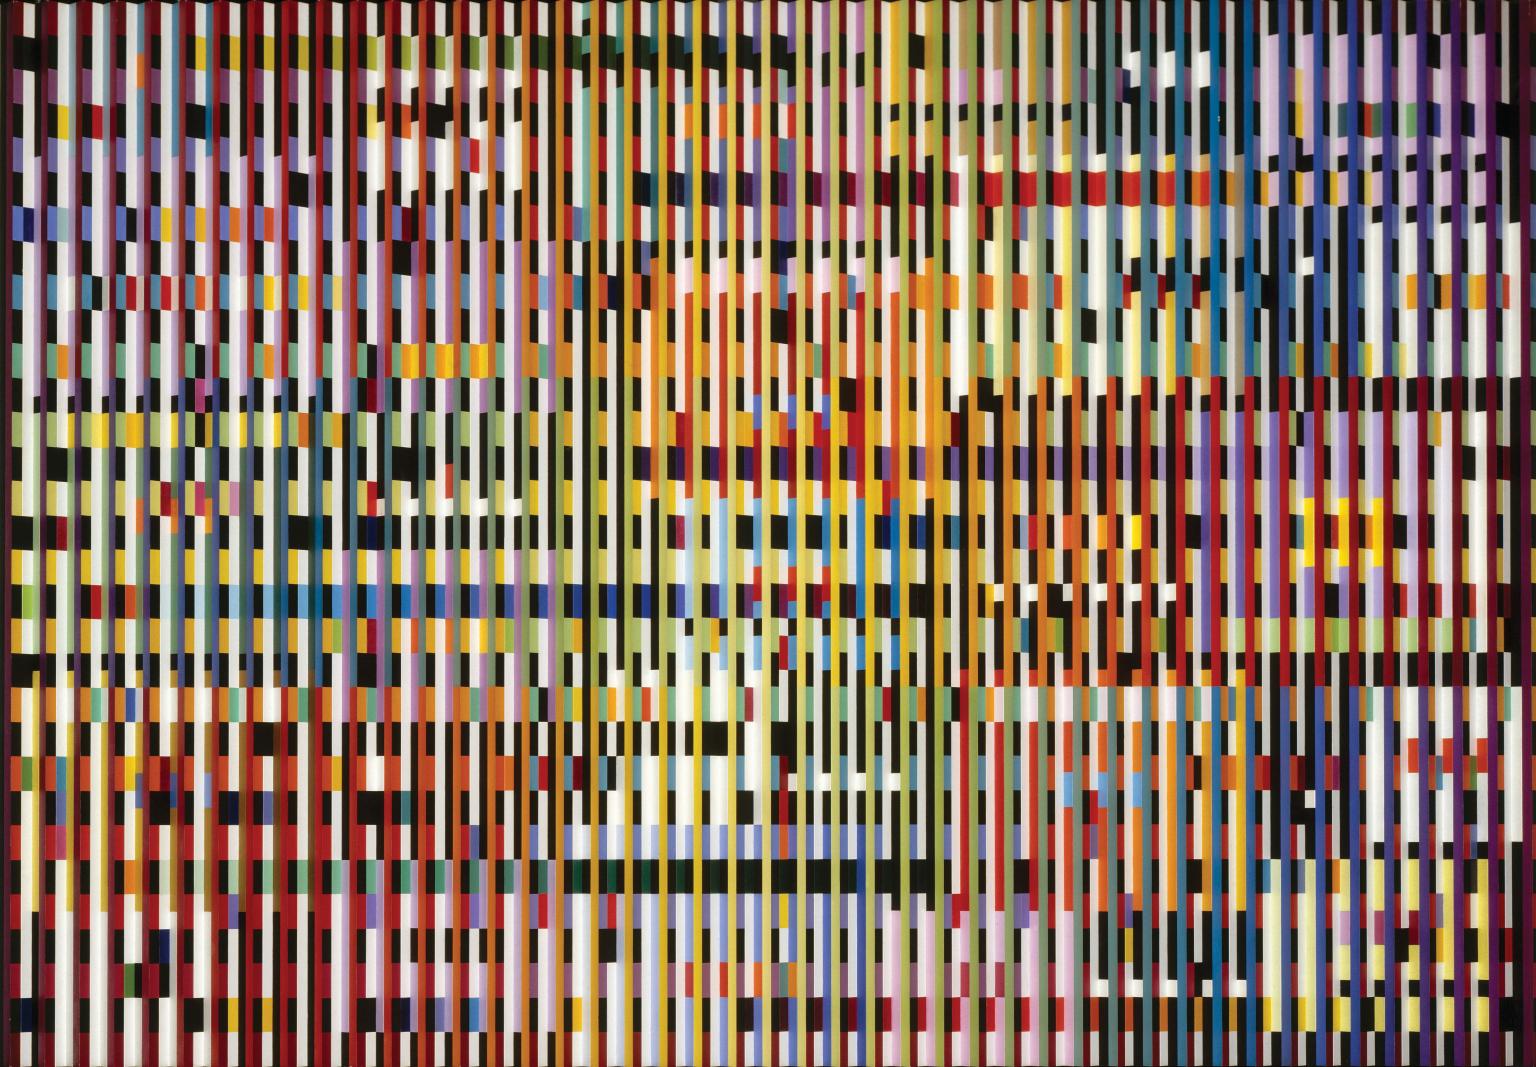 Three-dimensional abstract artwork, with patchy, multicolored narrow grids.